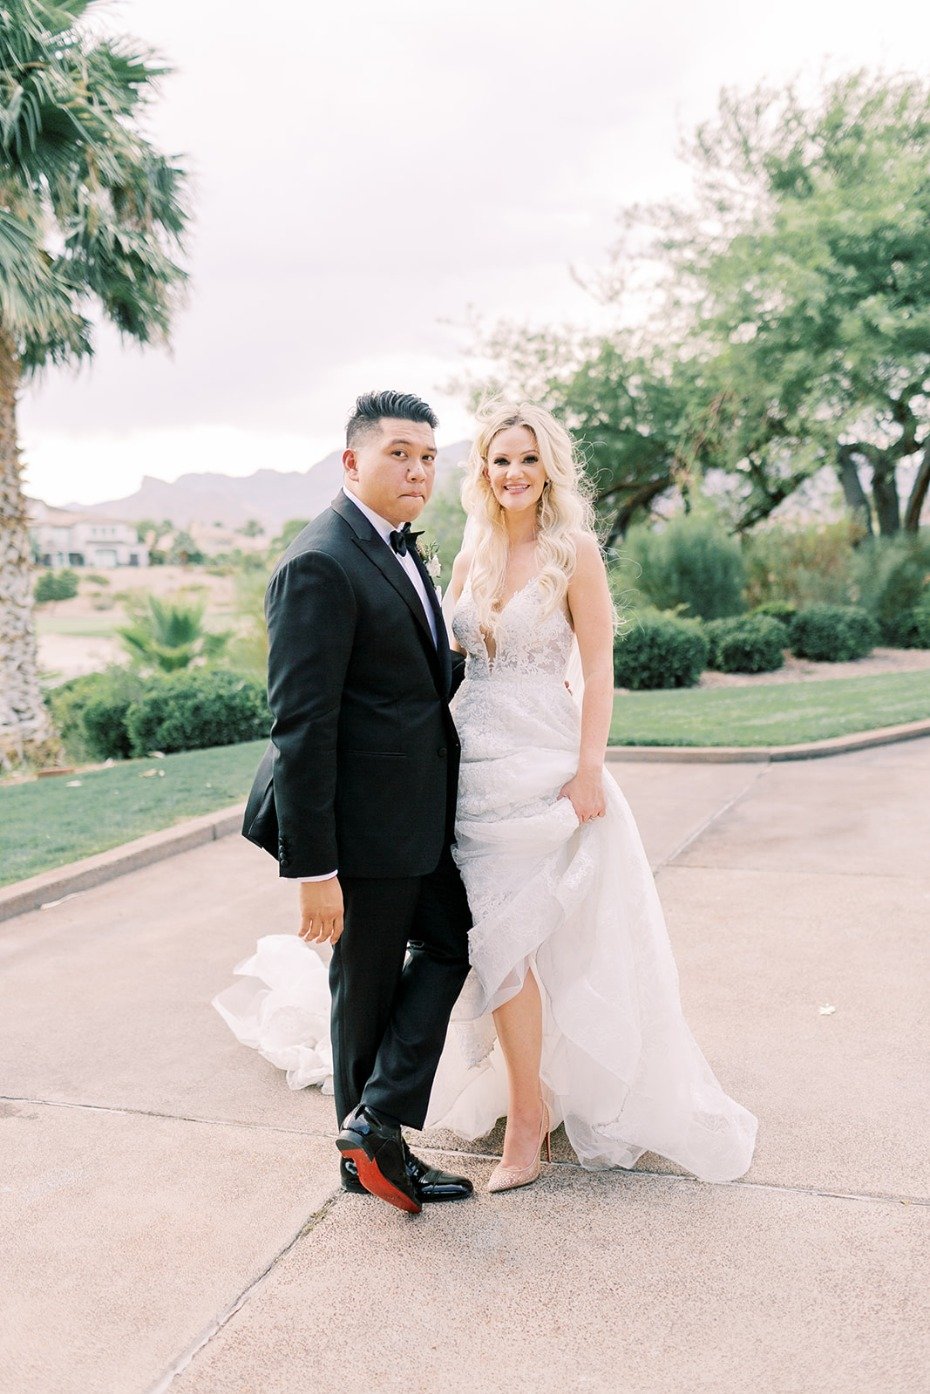 Connecting With Your Closest Crew Is What Red Rock Country Club Weddings Are All About